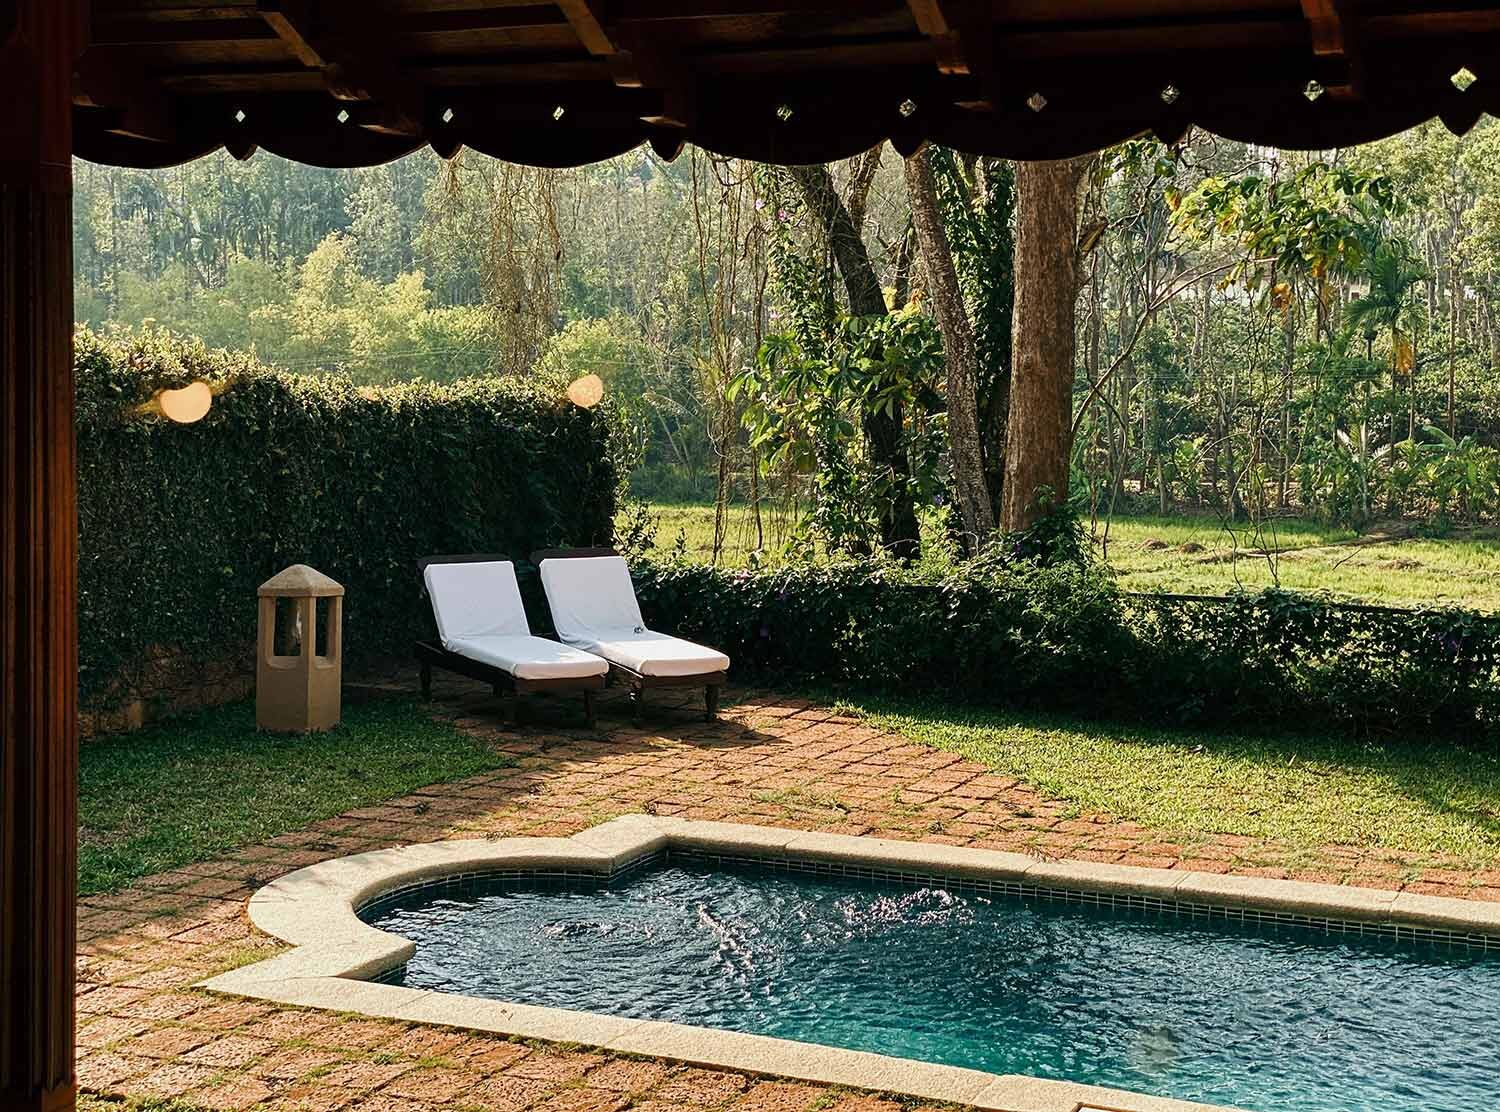 Evolve Back, Coorg With its own — you guessed it — private pool. All rooms here come with one!